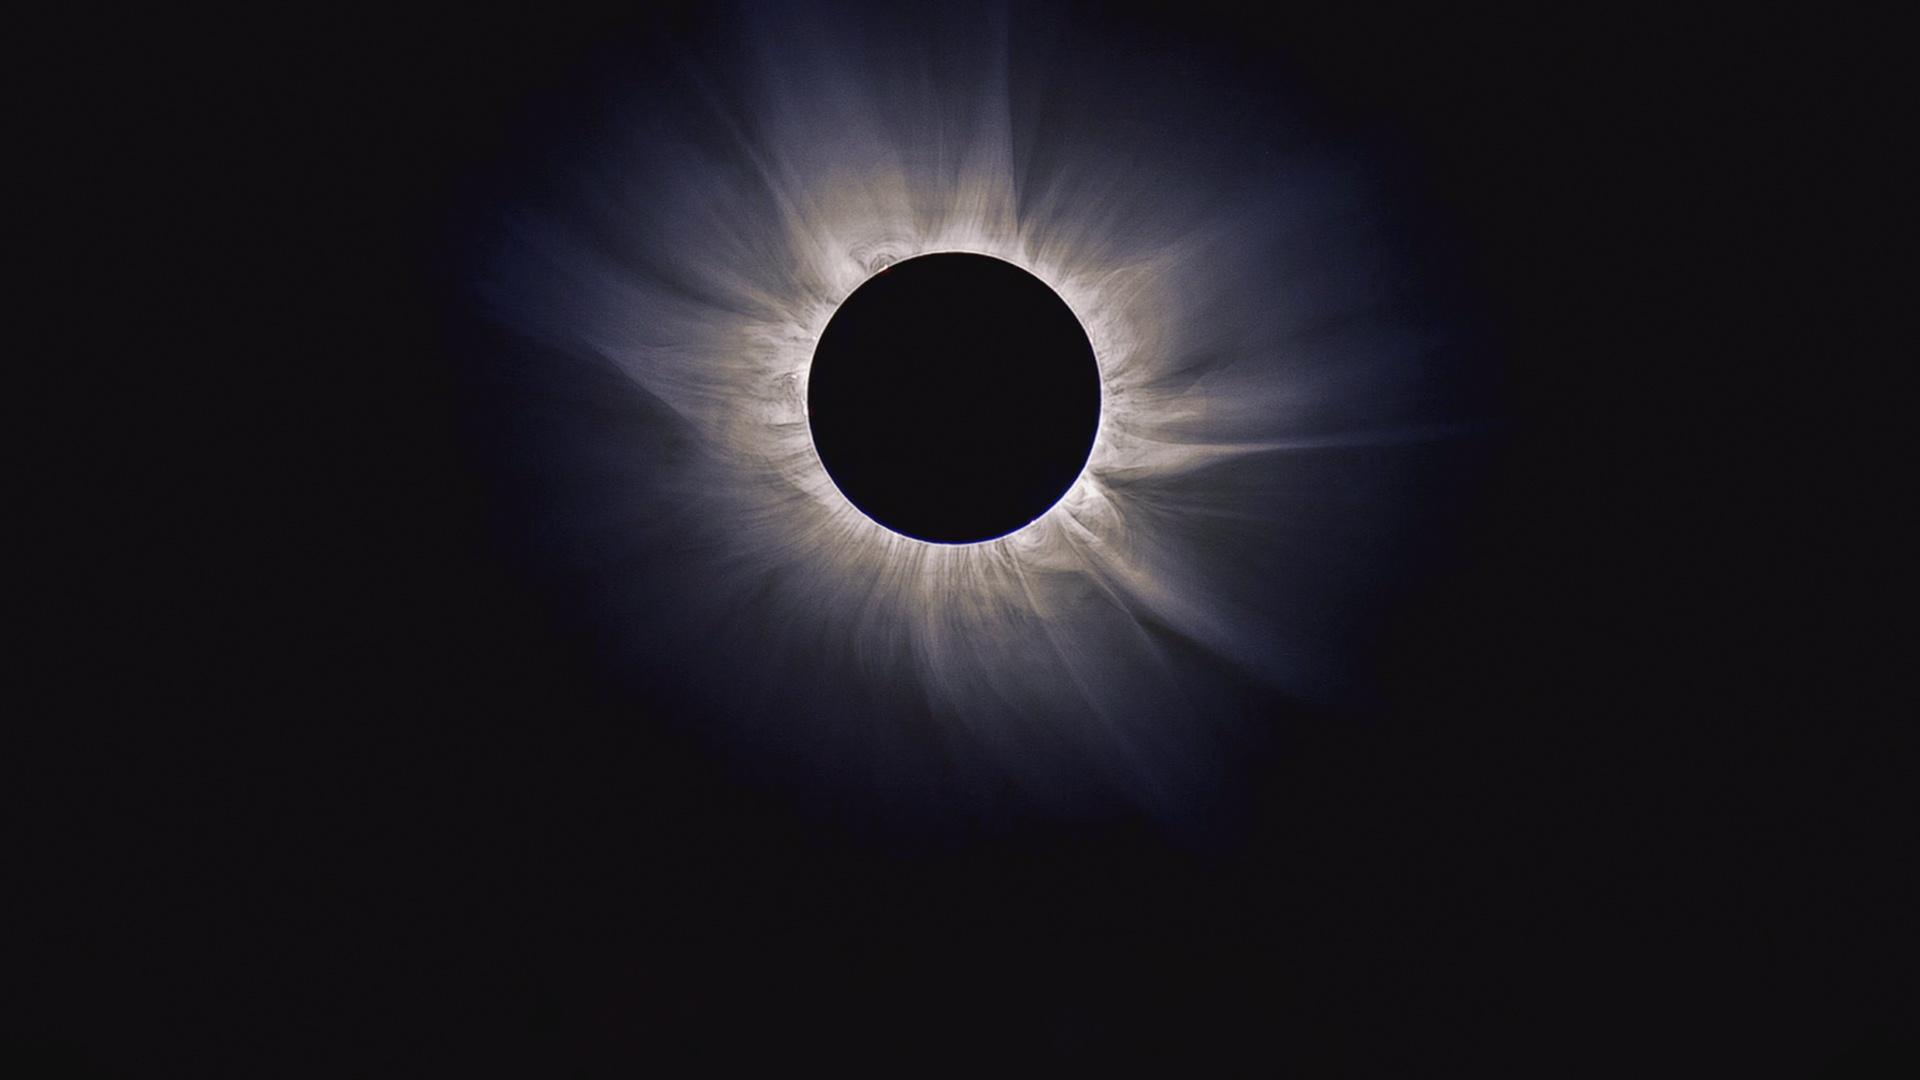 an image of an eclipse where the moon is fully in front of the sun